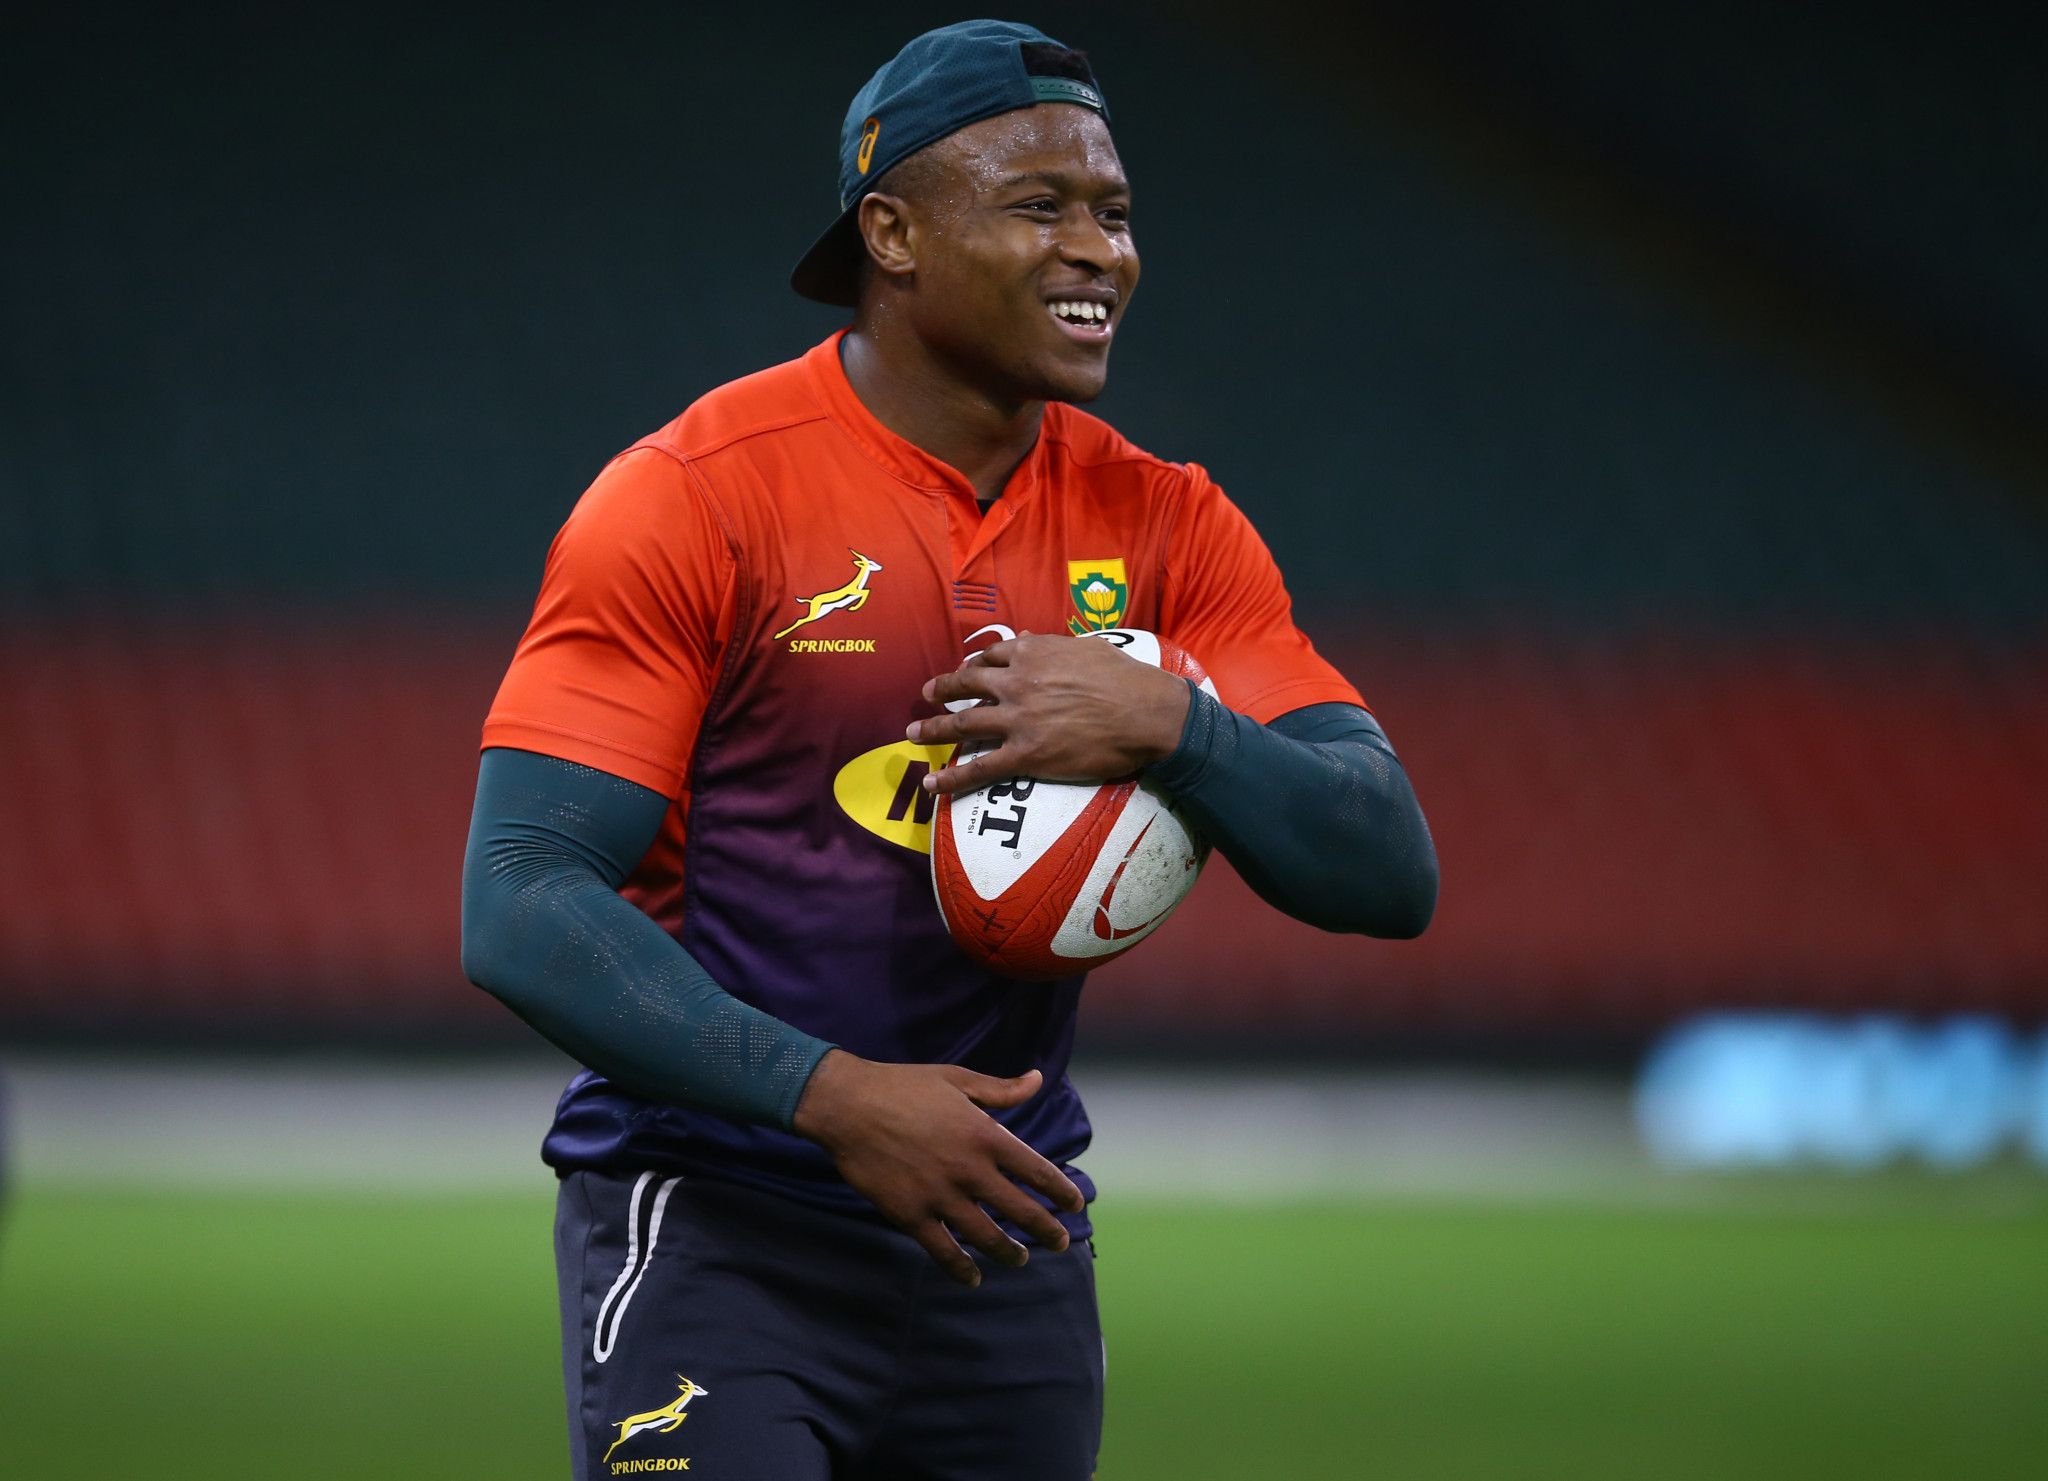 Aphiwe Dyantyi was World Rugby's breakthrough player of the year in 2018 ©Getty Images